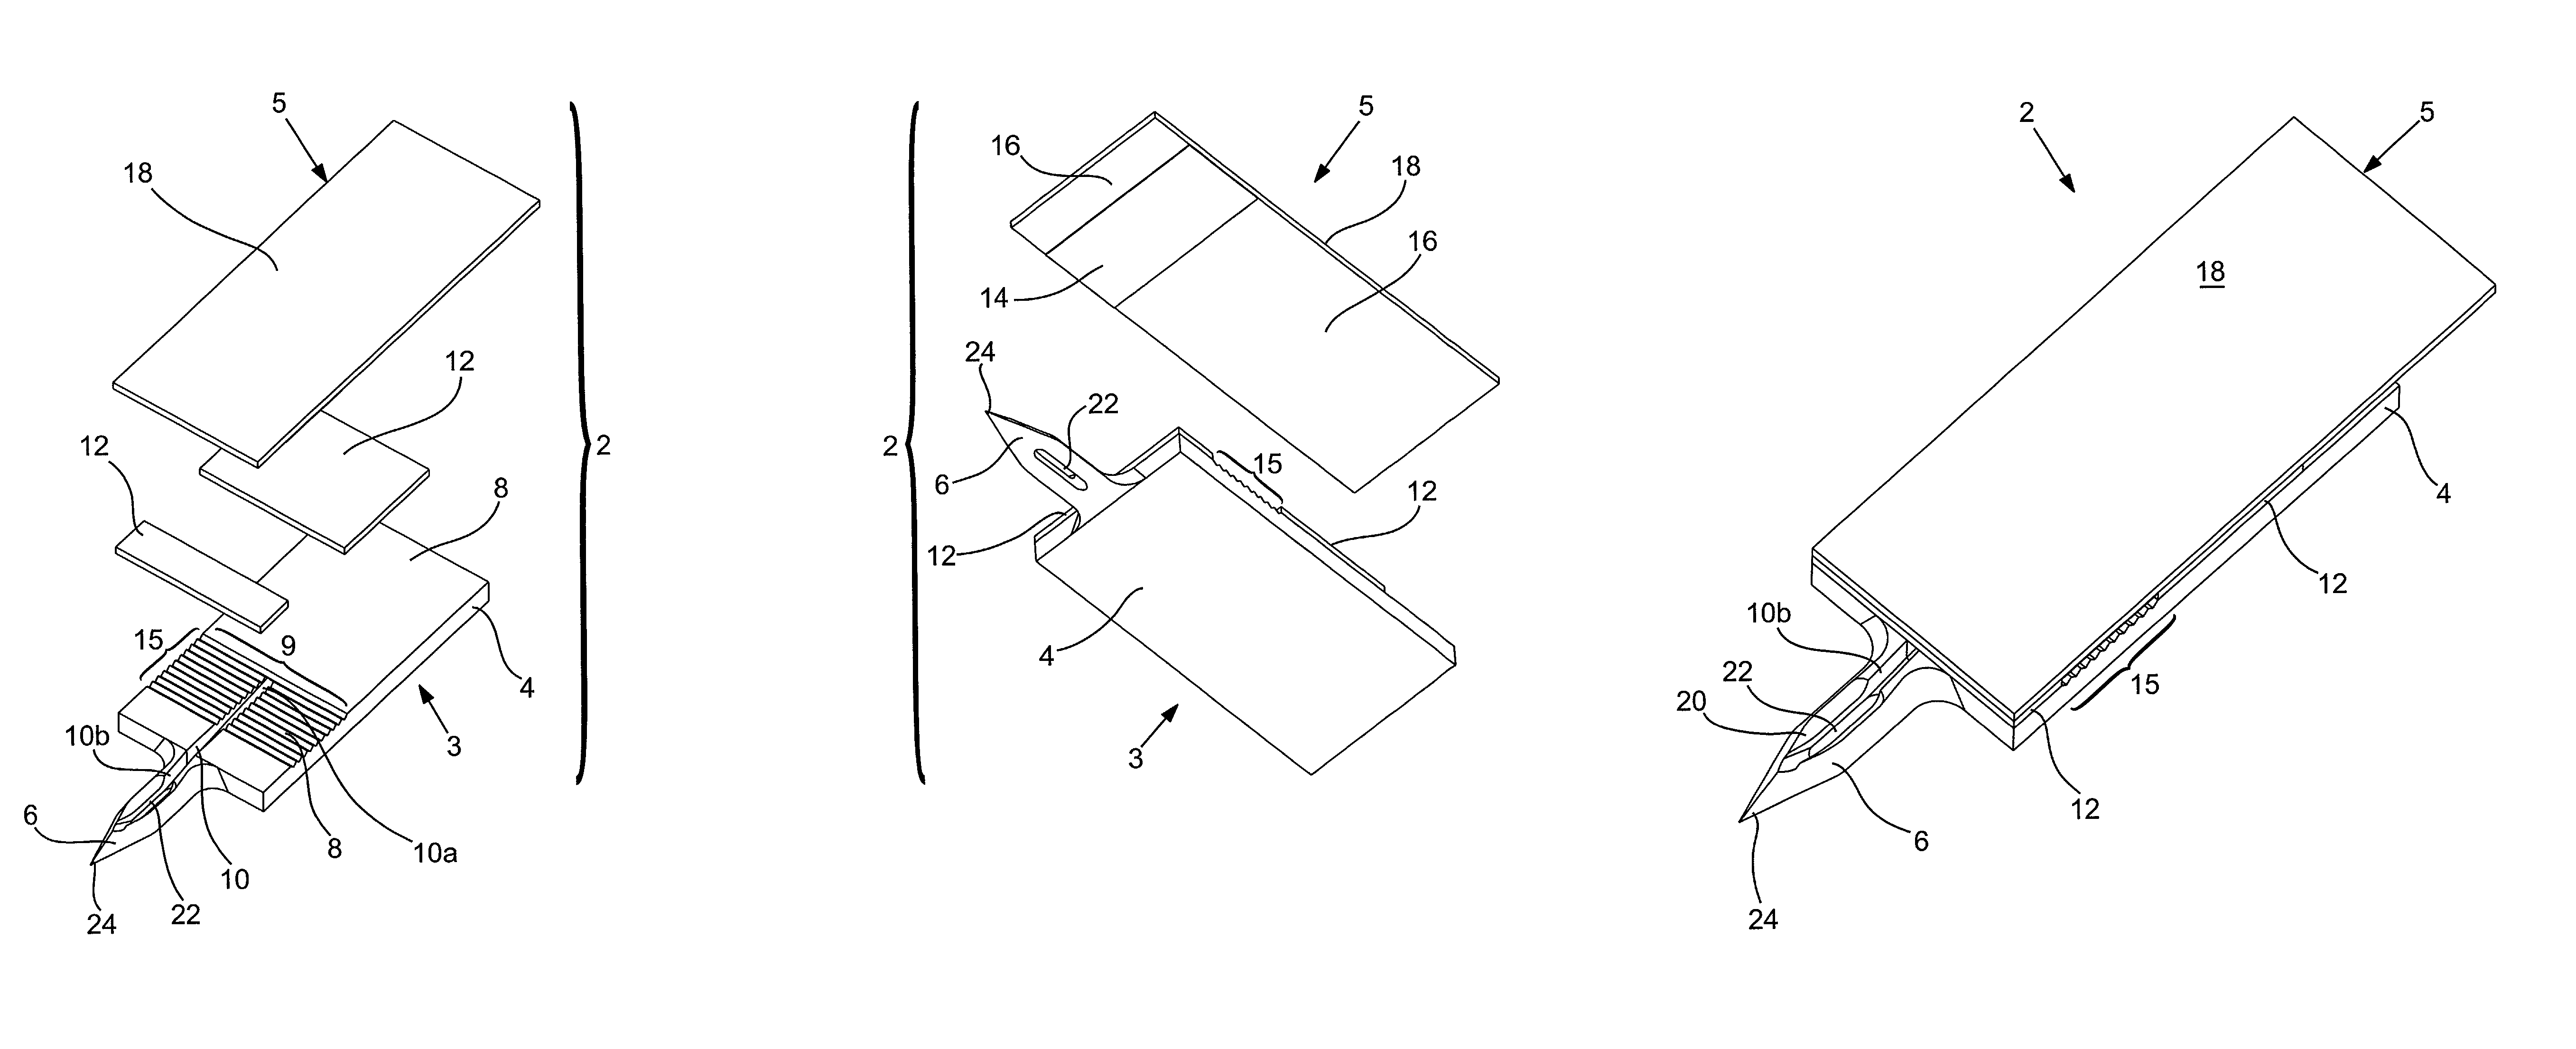 Methods of fabricating physiological sample collection devices